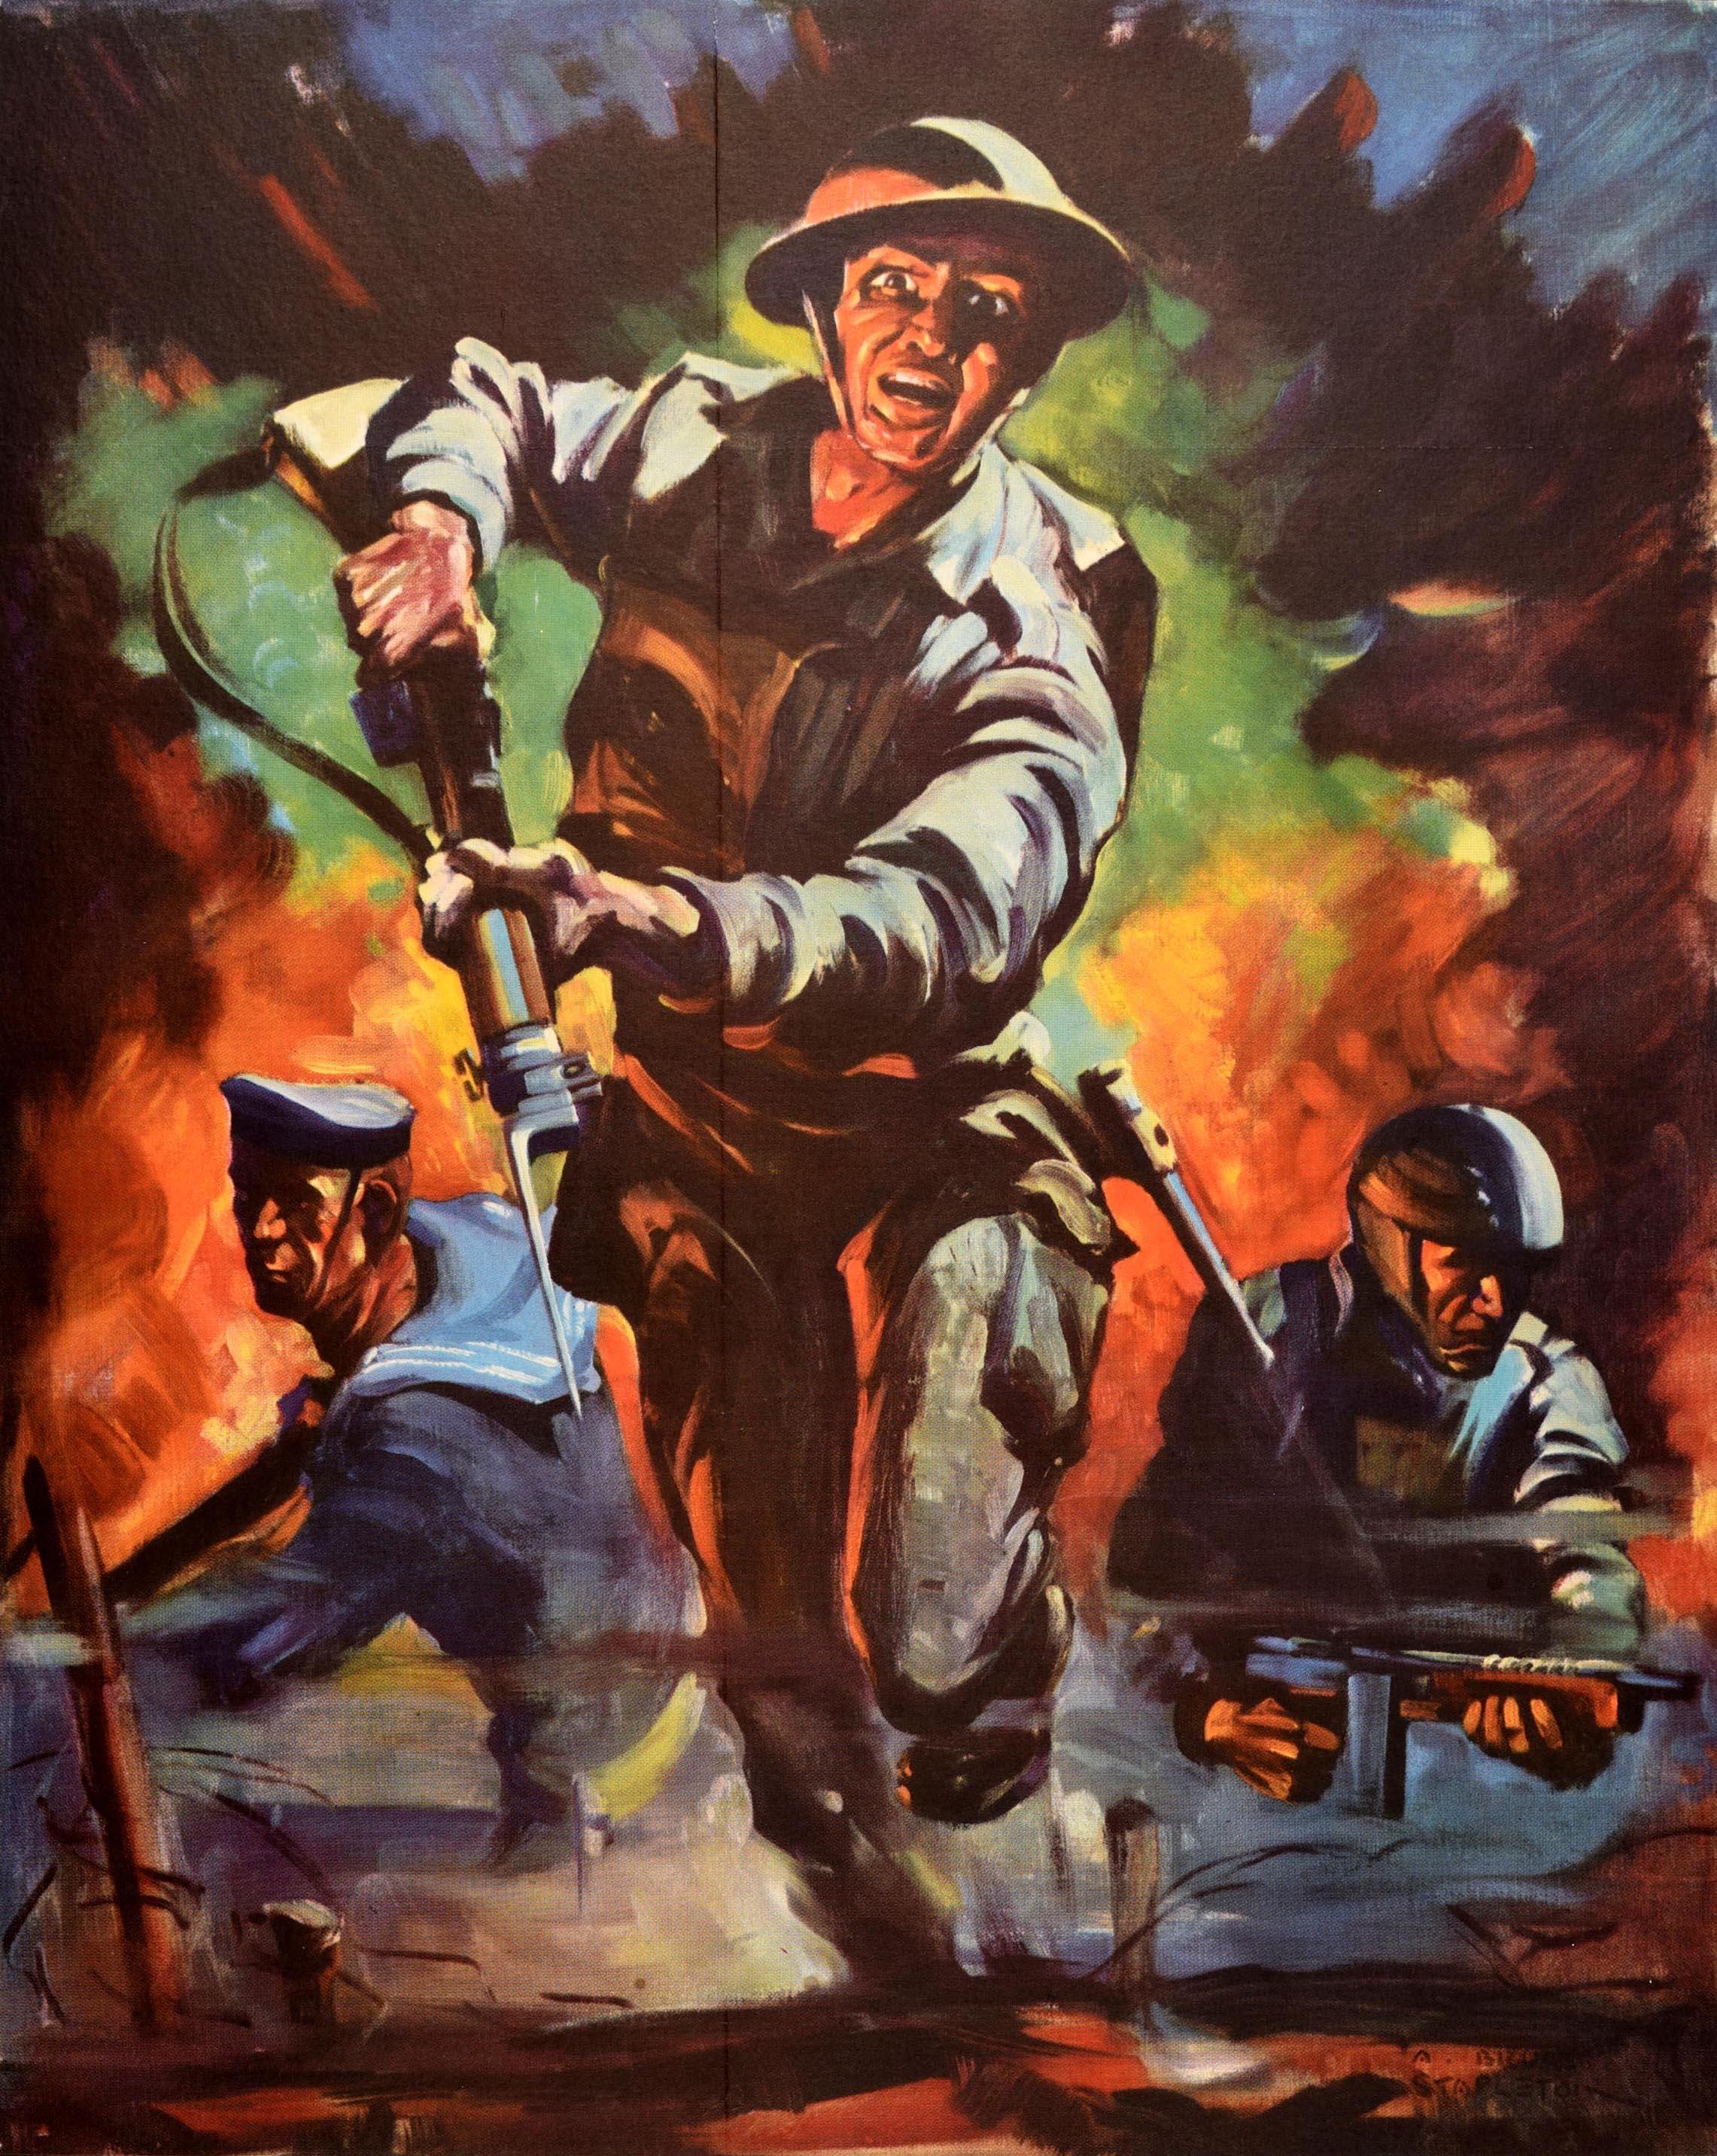 Original vintage World War Two poster - Buy Victory Bonds - featuring a dynamic battle scene with explosions in the background and three men in military uniform armed with guns charging forward over barbed wire, an army soldier in the centre with a